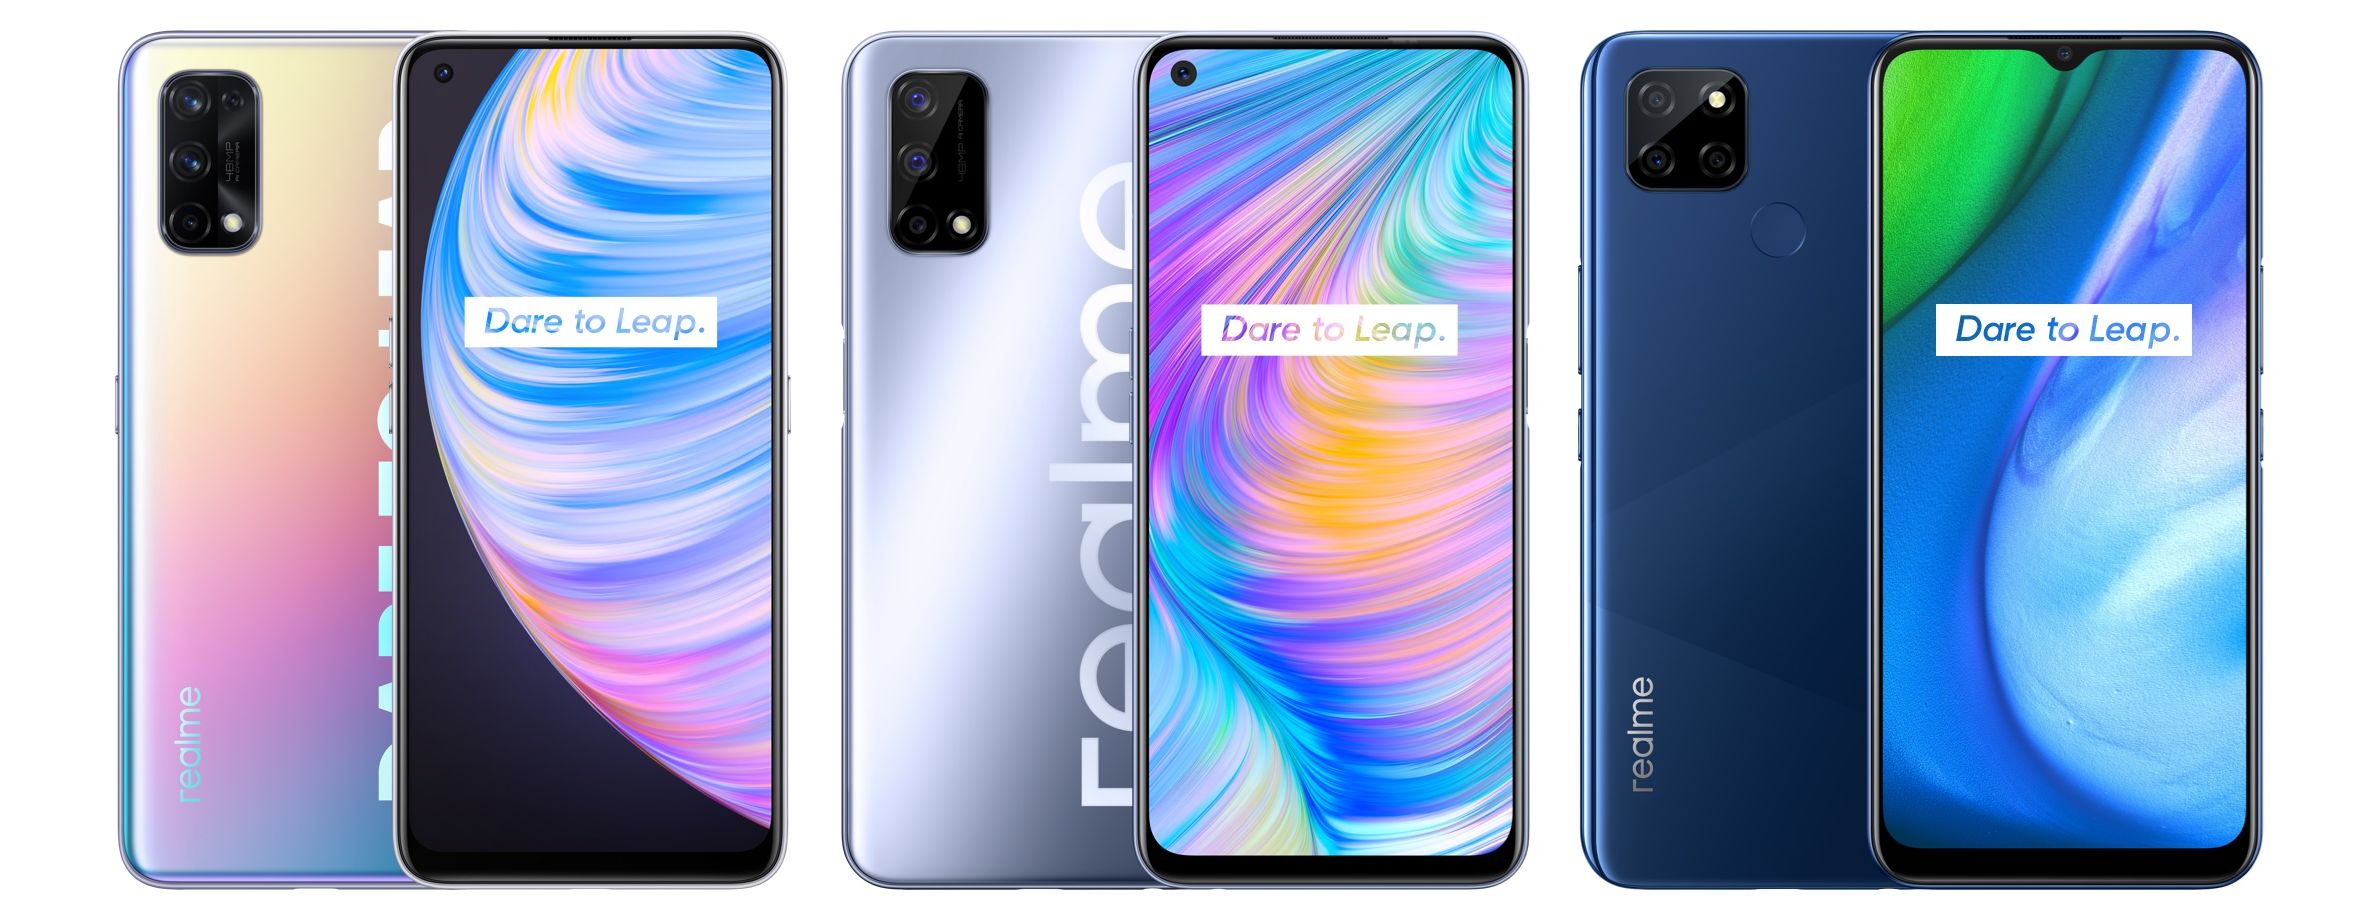 Realme Q2, Q2 Pro, and Q2i launched in China with 998 Yuan (~$148) starting price